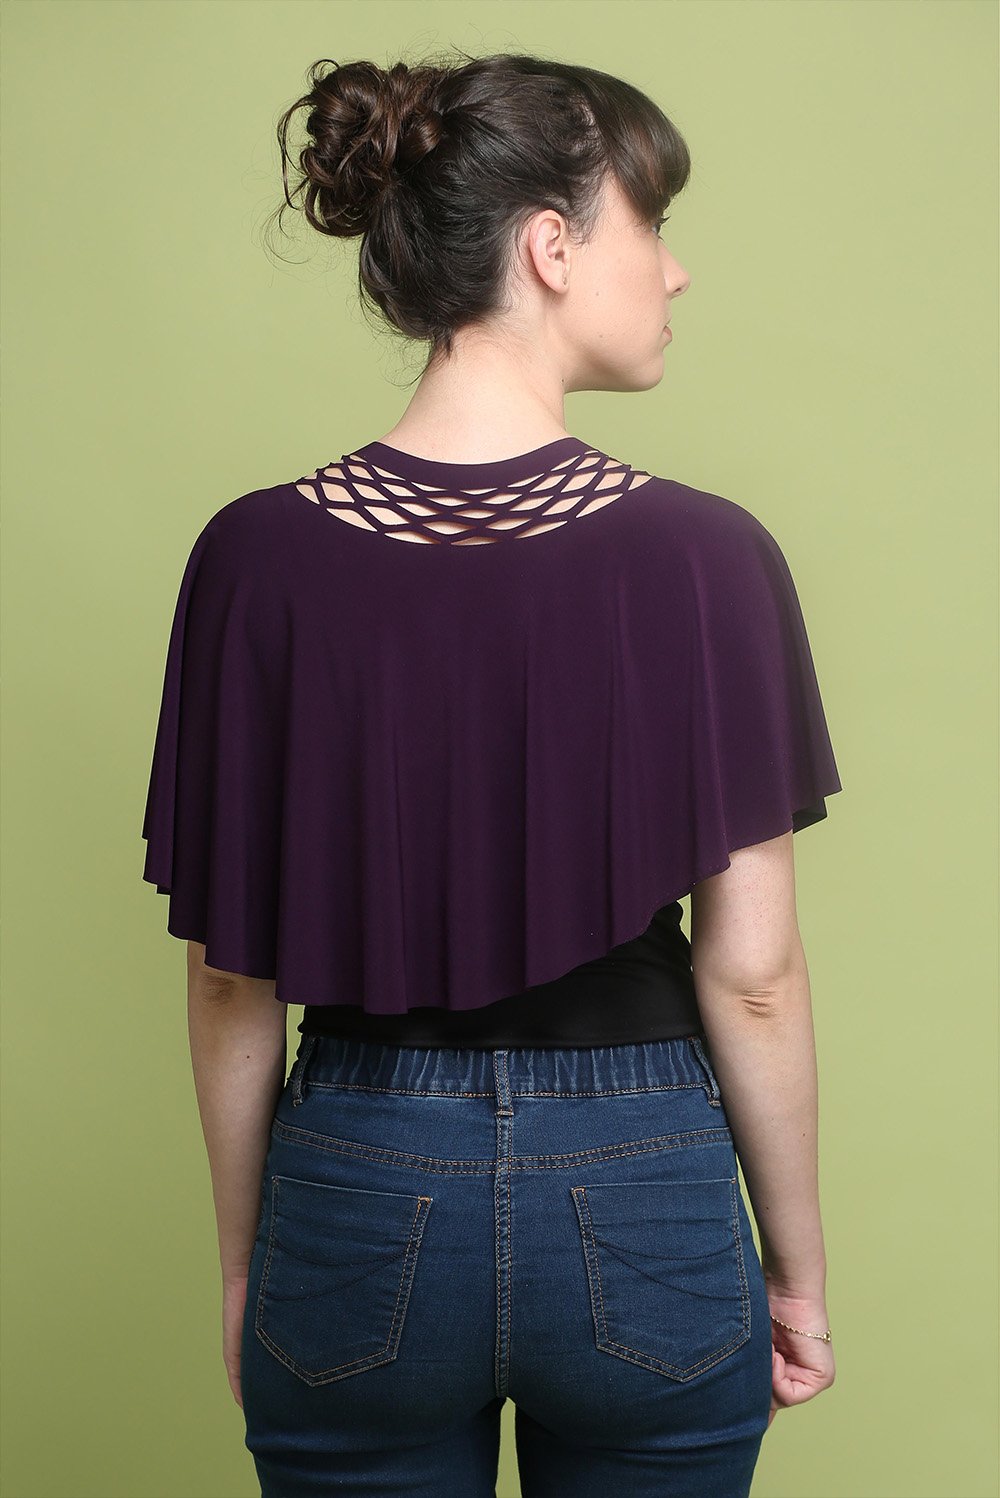 A special top for the event with a chain cut - a purple top